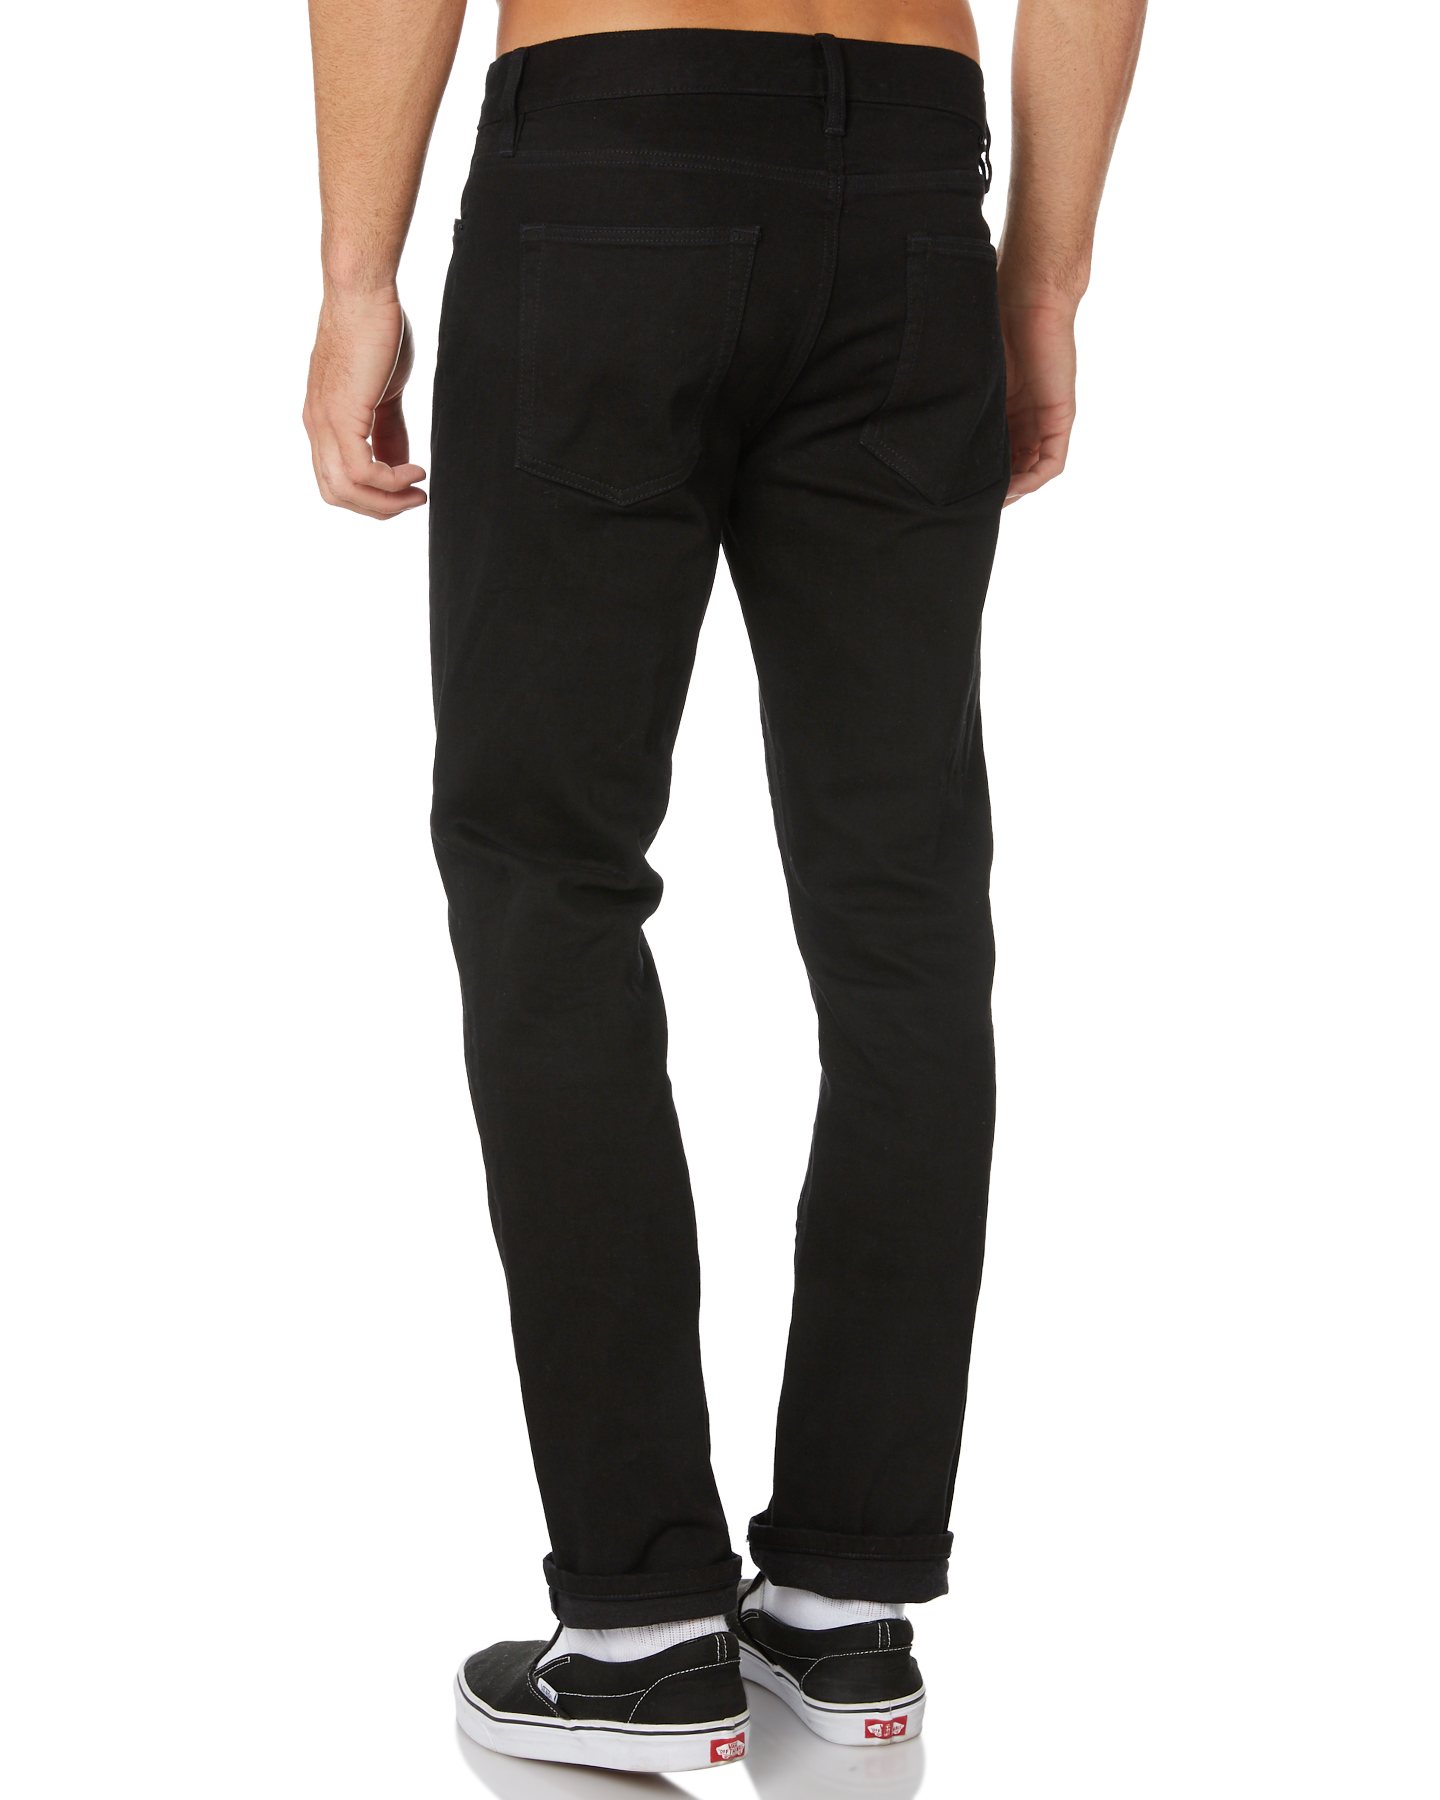 Outerknown Sea Local Straight Fit Mens Jeans - Jet Black | SurfStitch